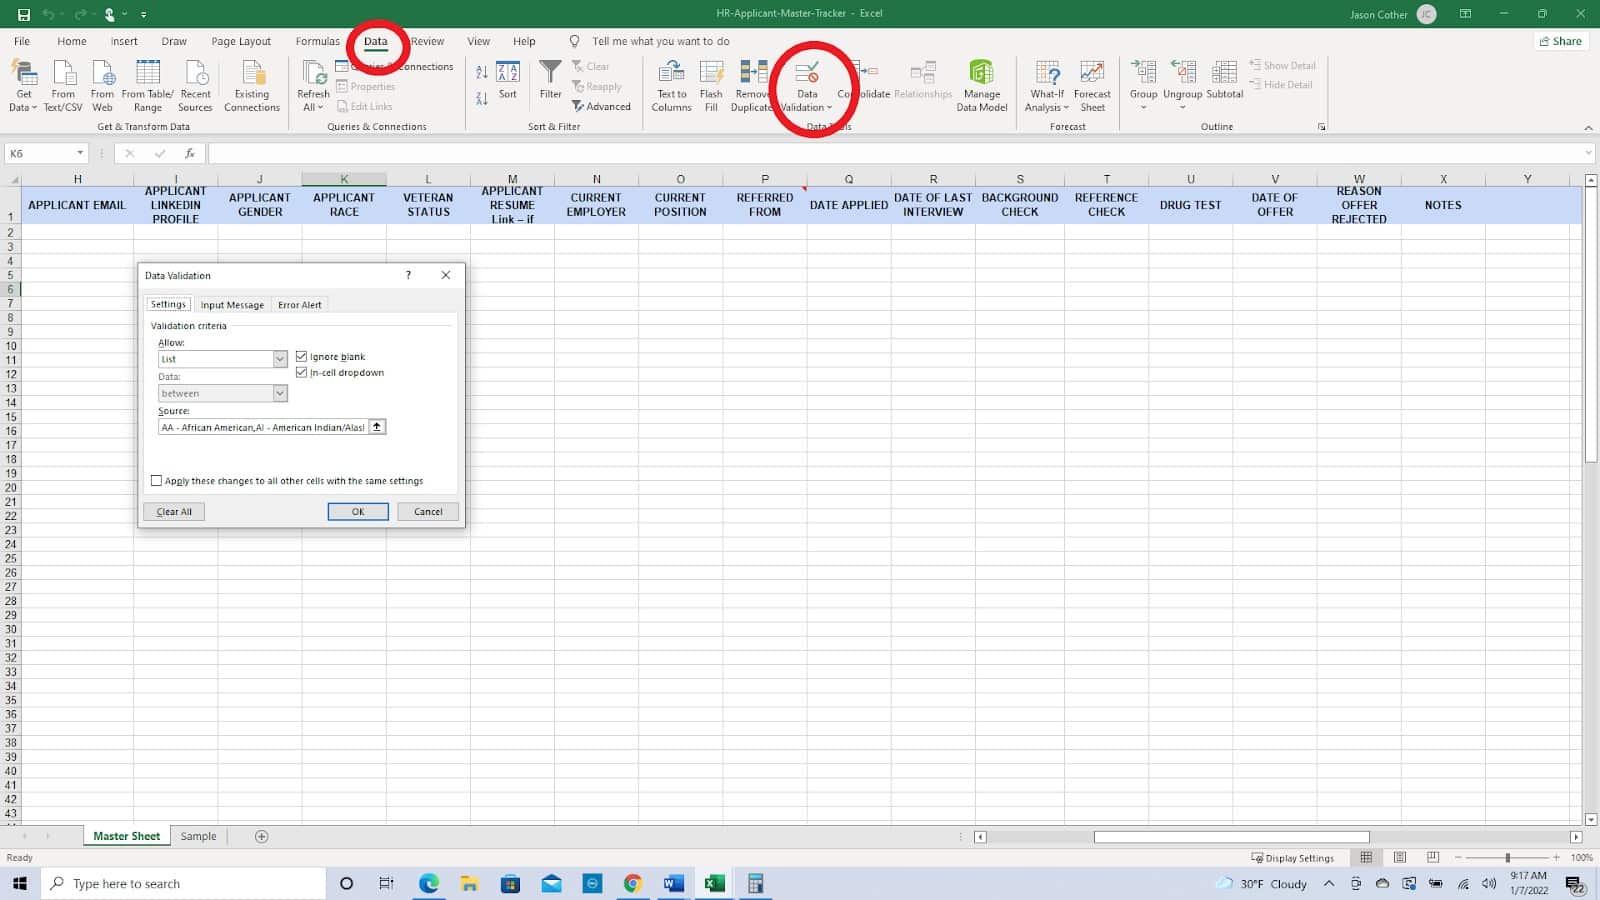 Simple instructions for modifying our templates in Excel.